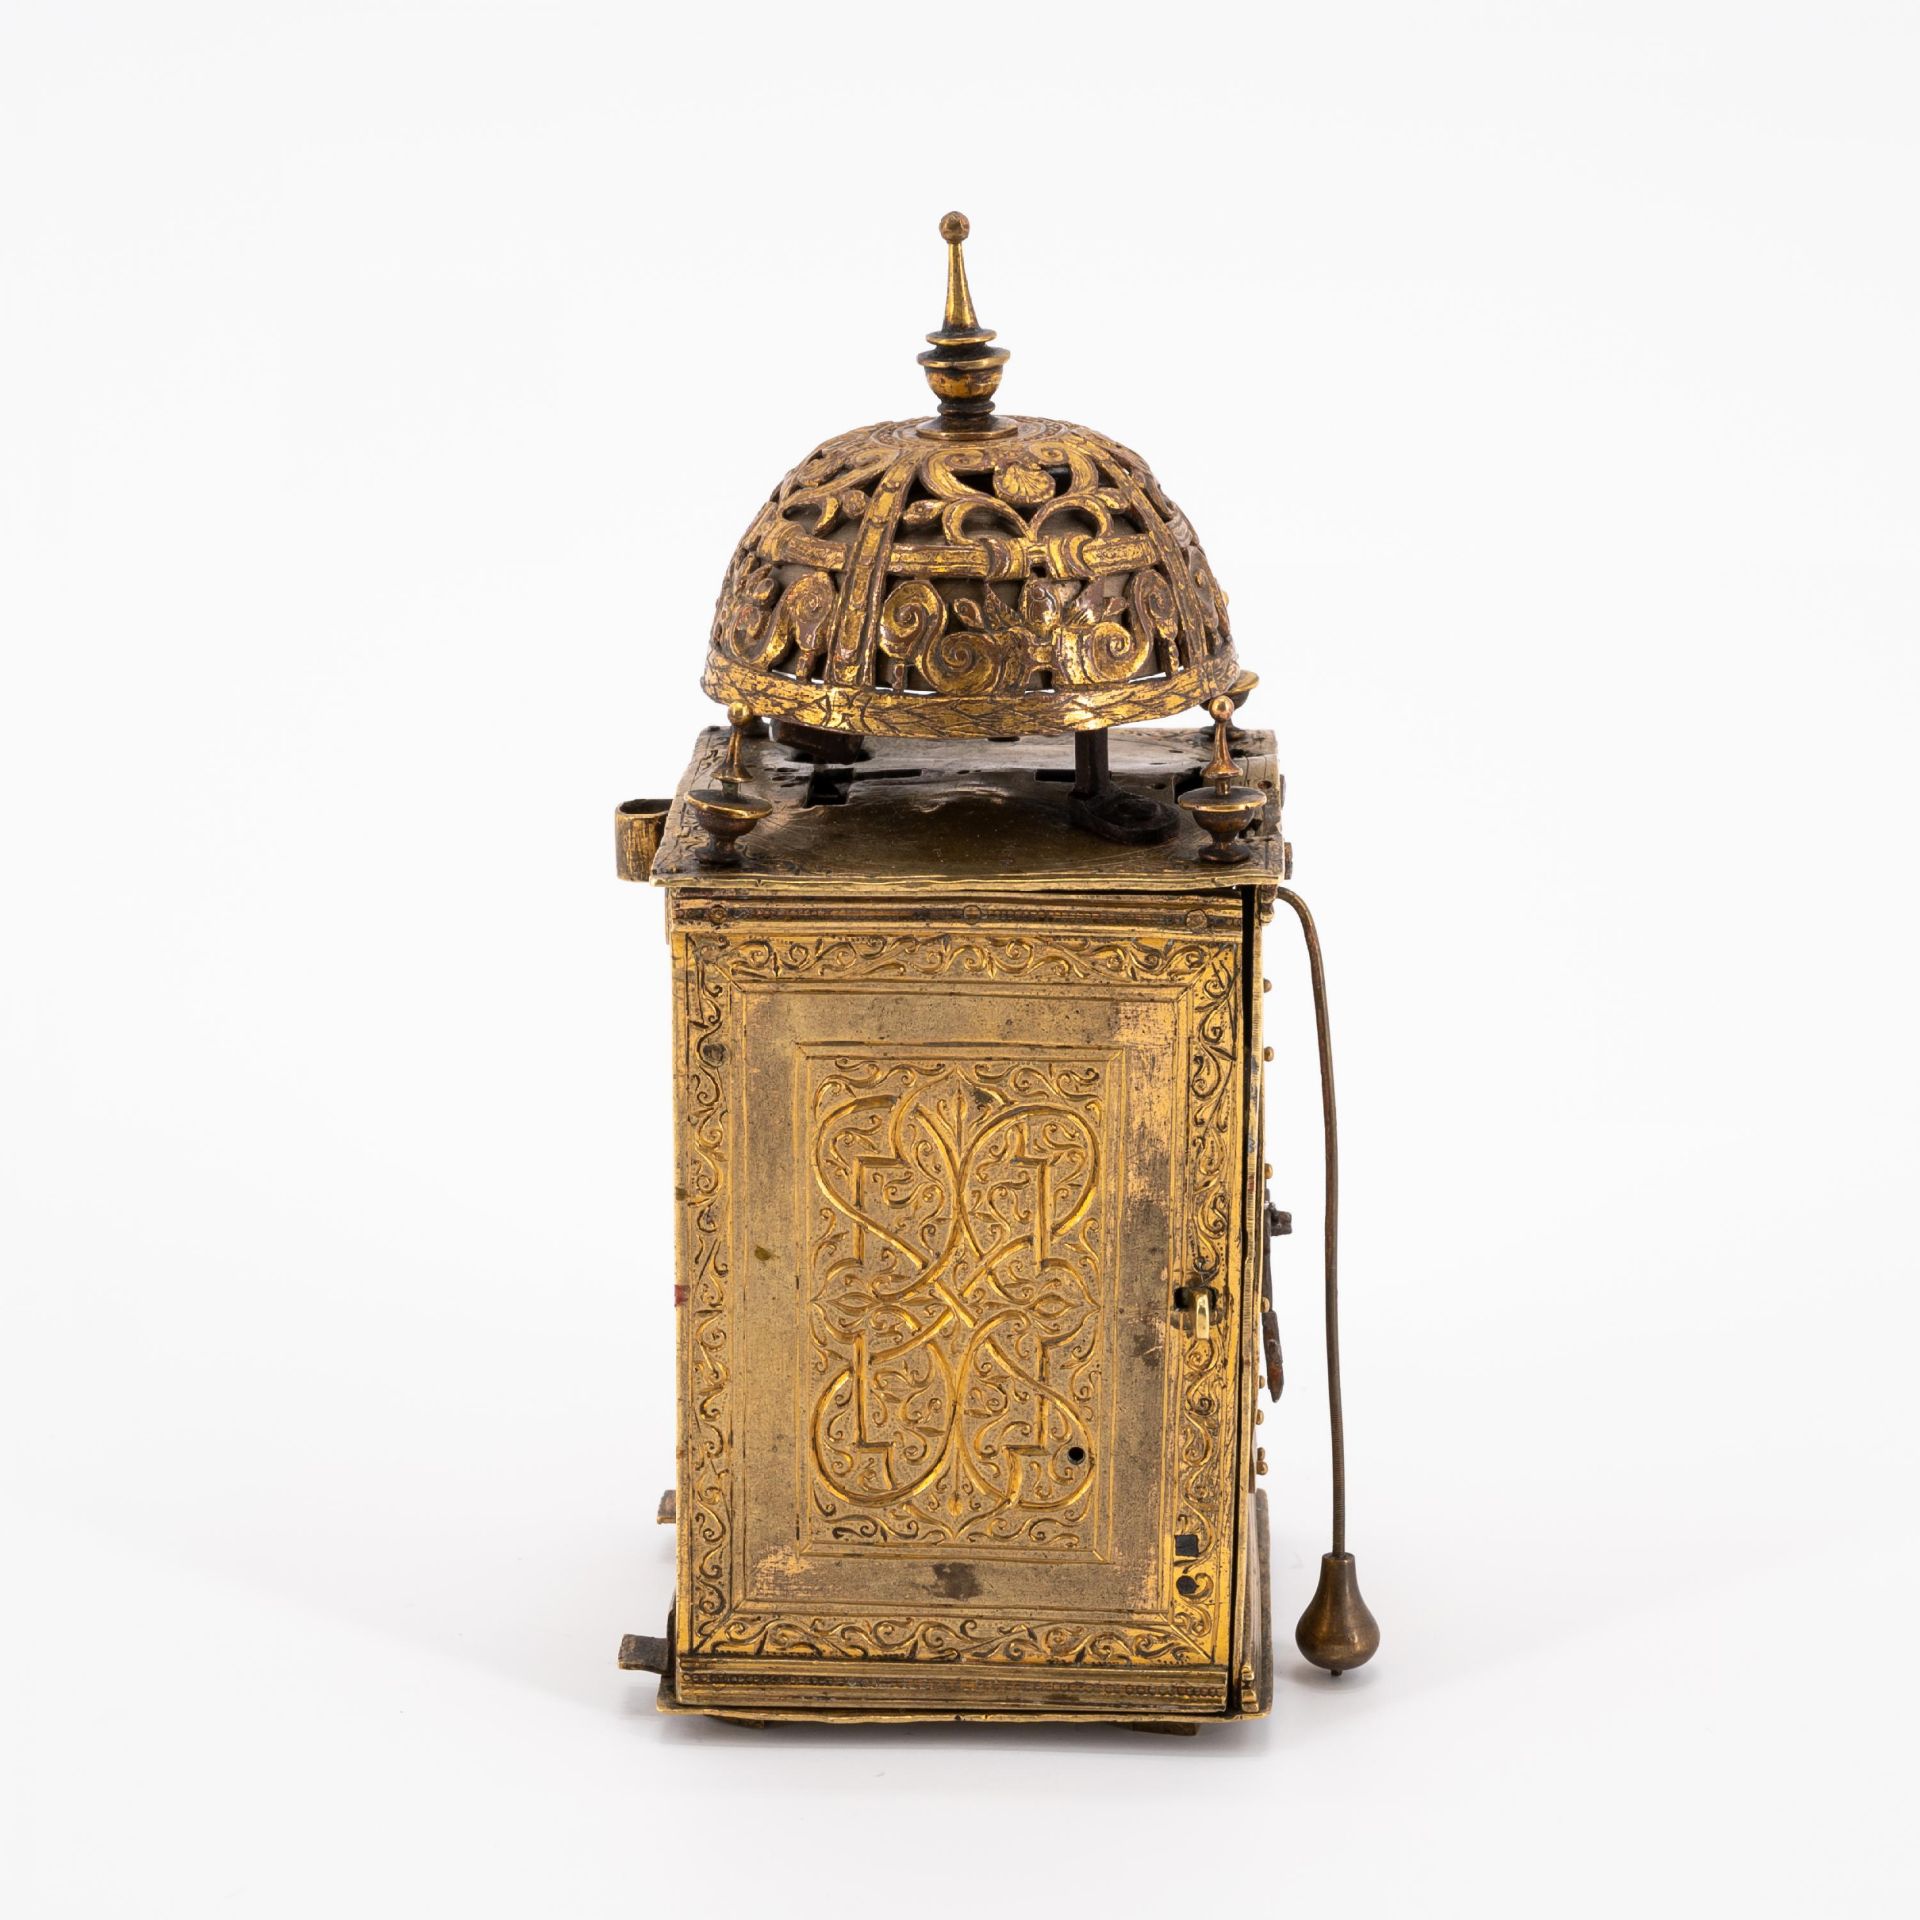 BRASS TABERNACLE CLOCK WITH FRONT ZAPPLER - Image 5 of 6